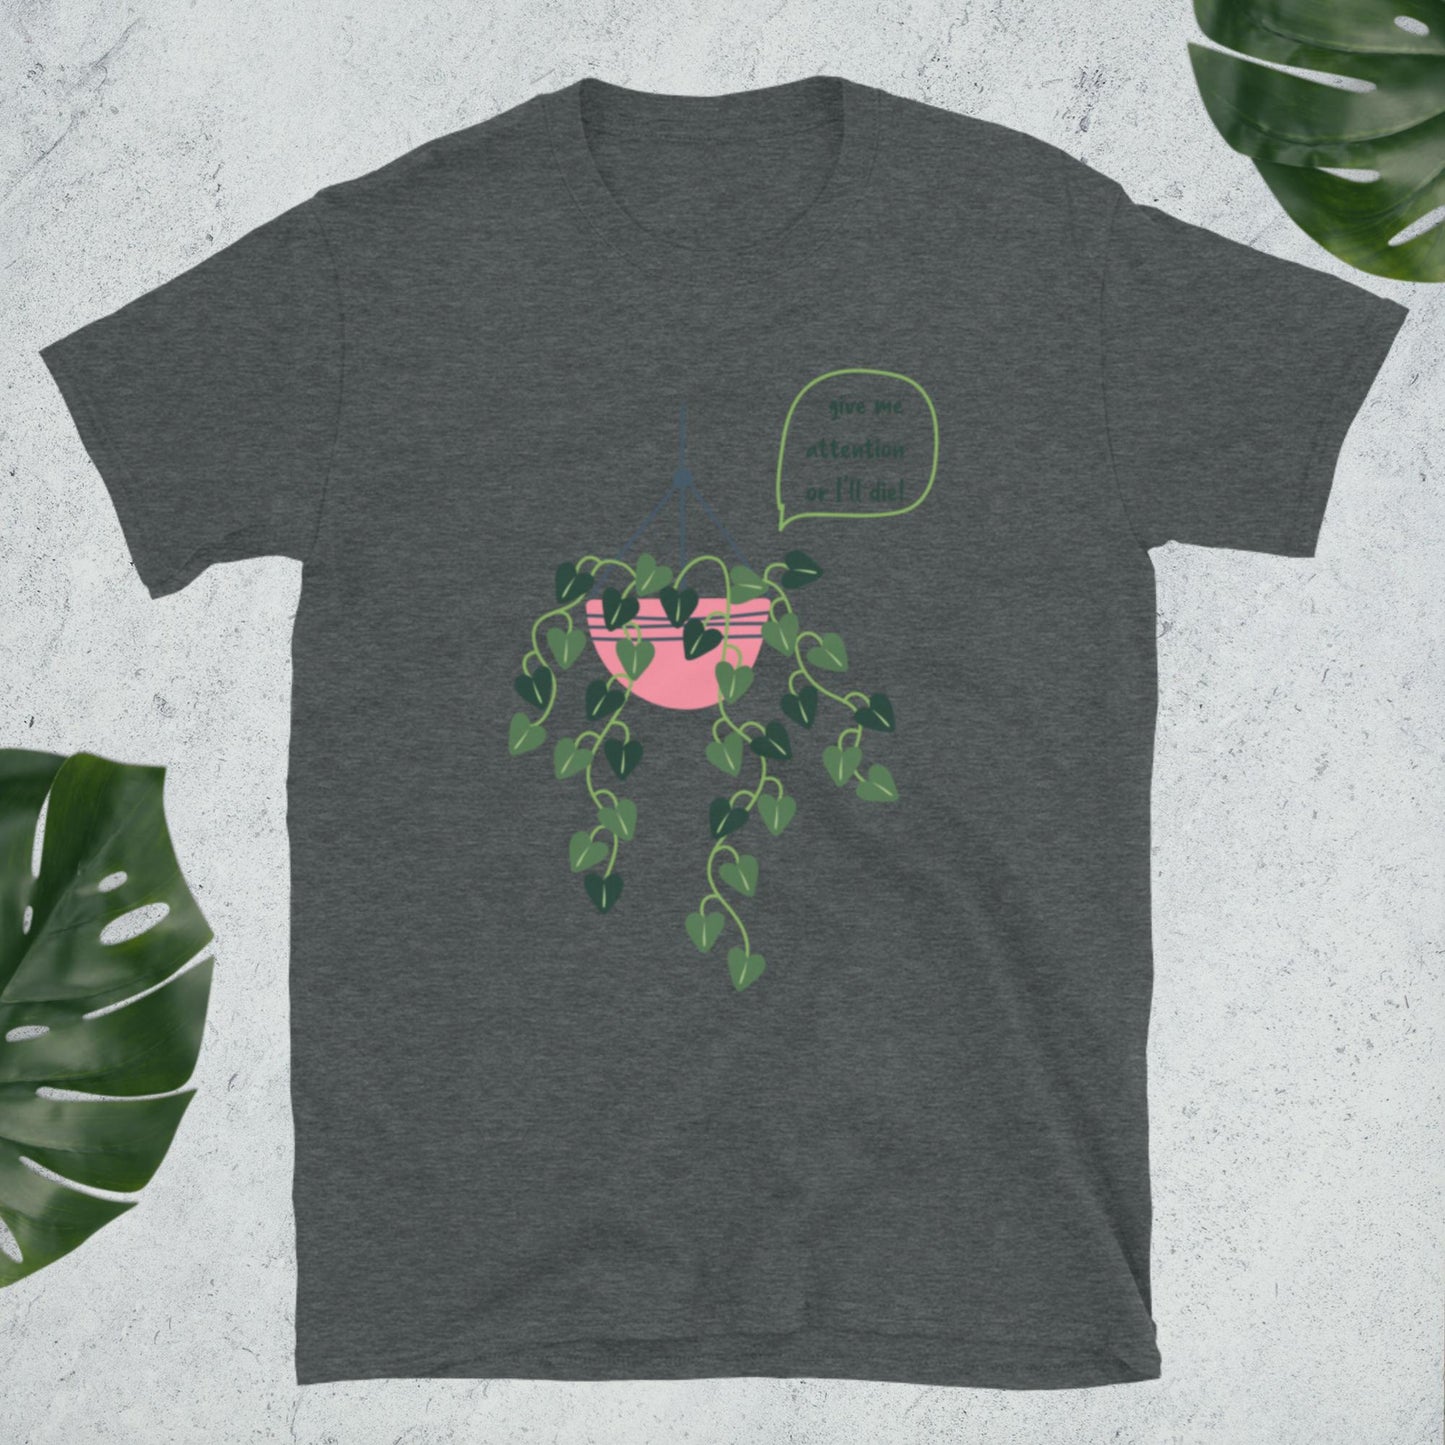 Attention Plant Shirt